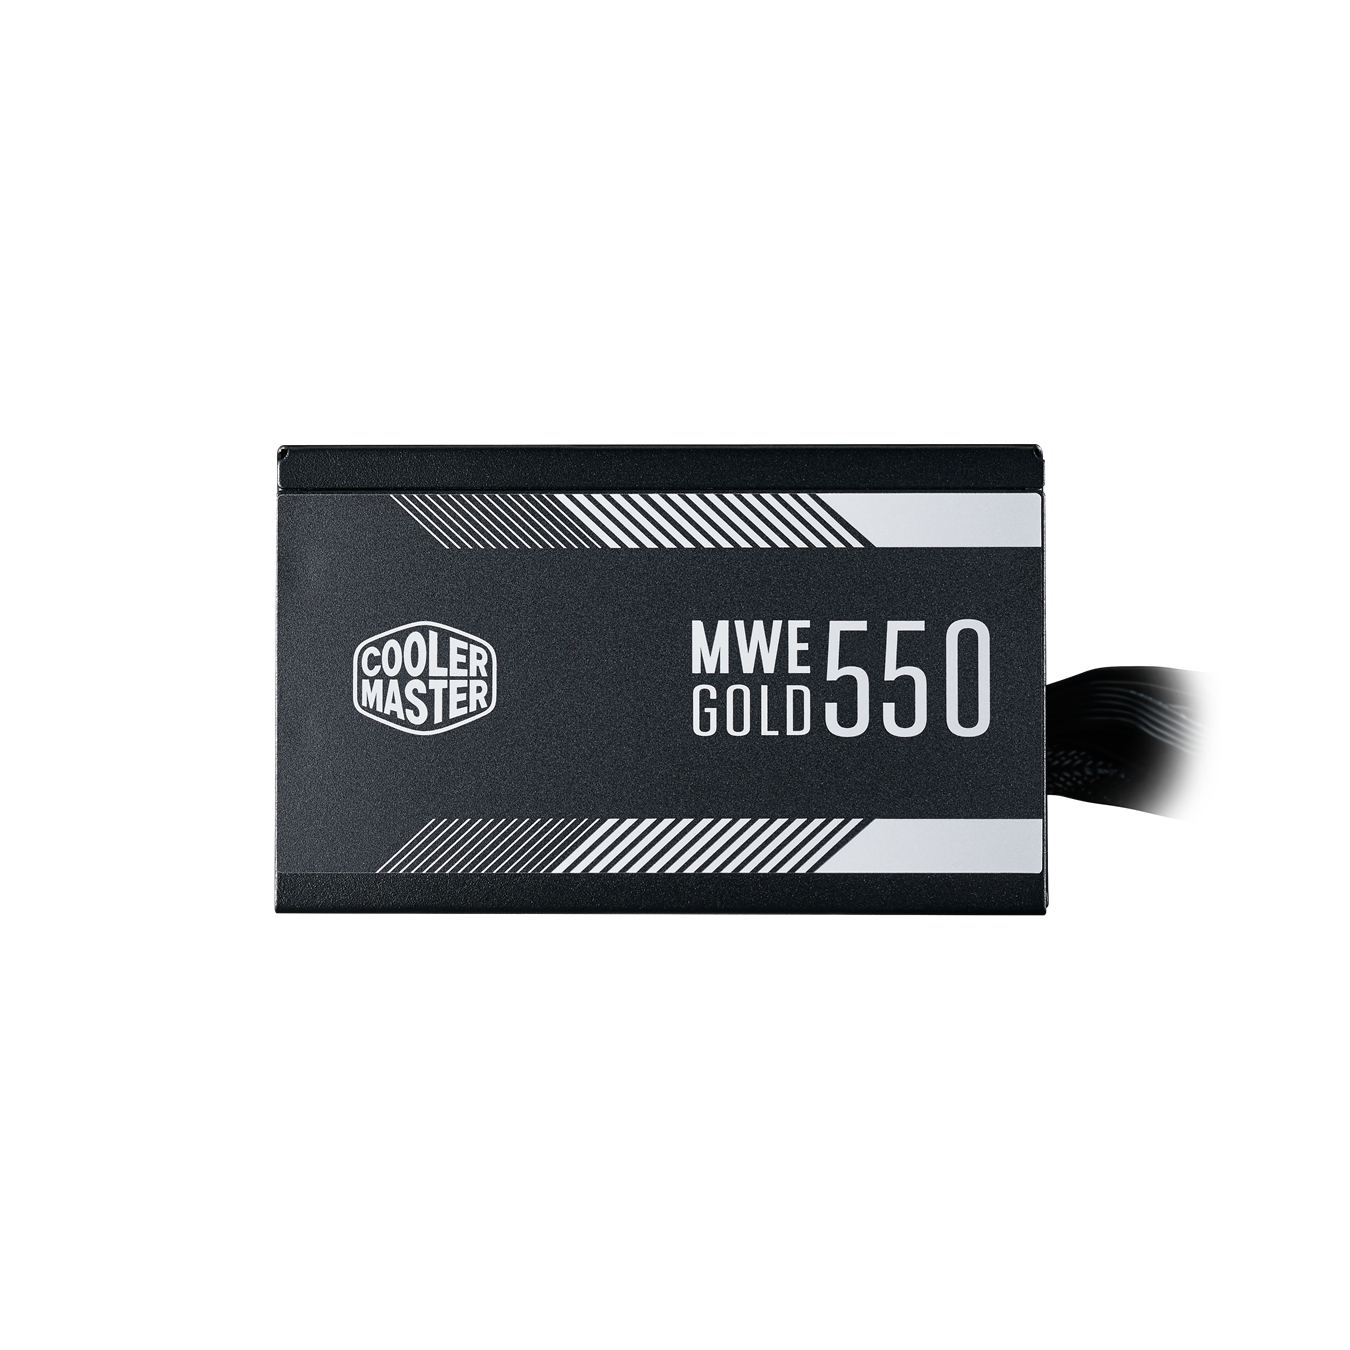 MWE Gold 550 - side angle view photo with product label